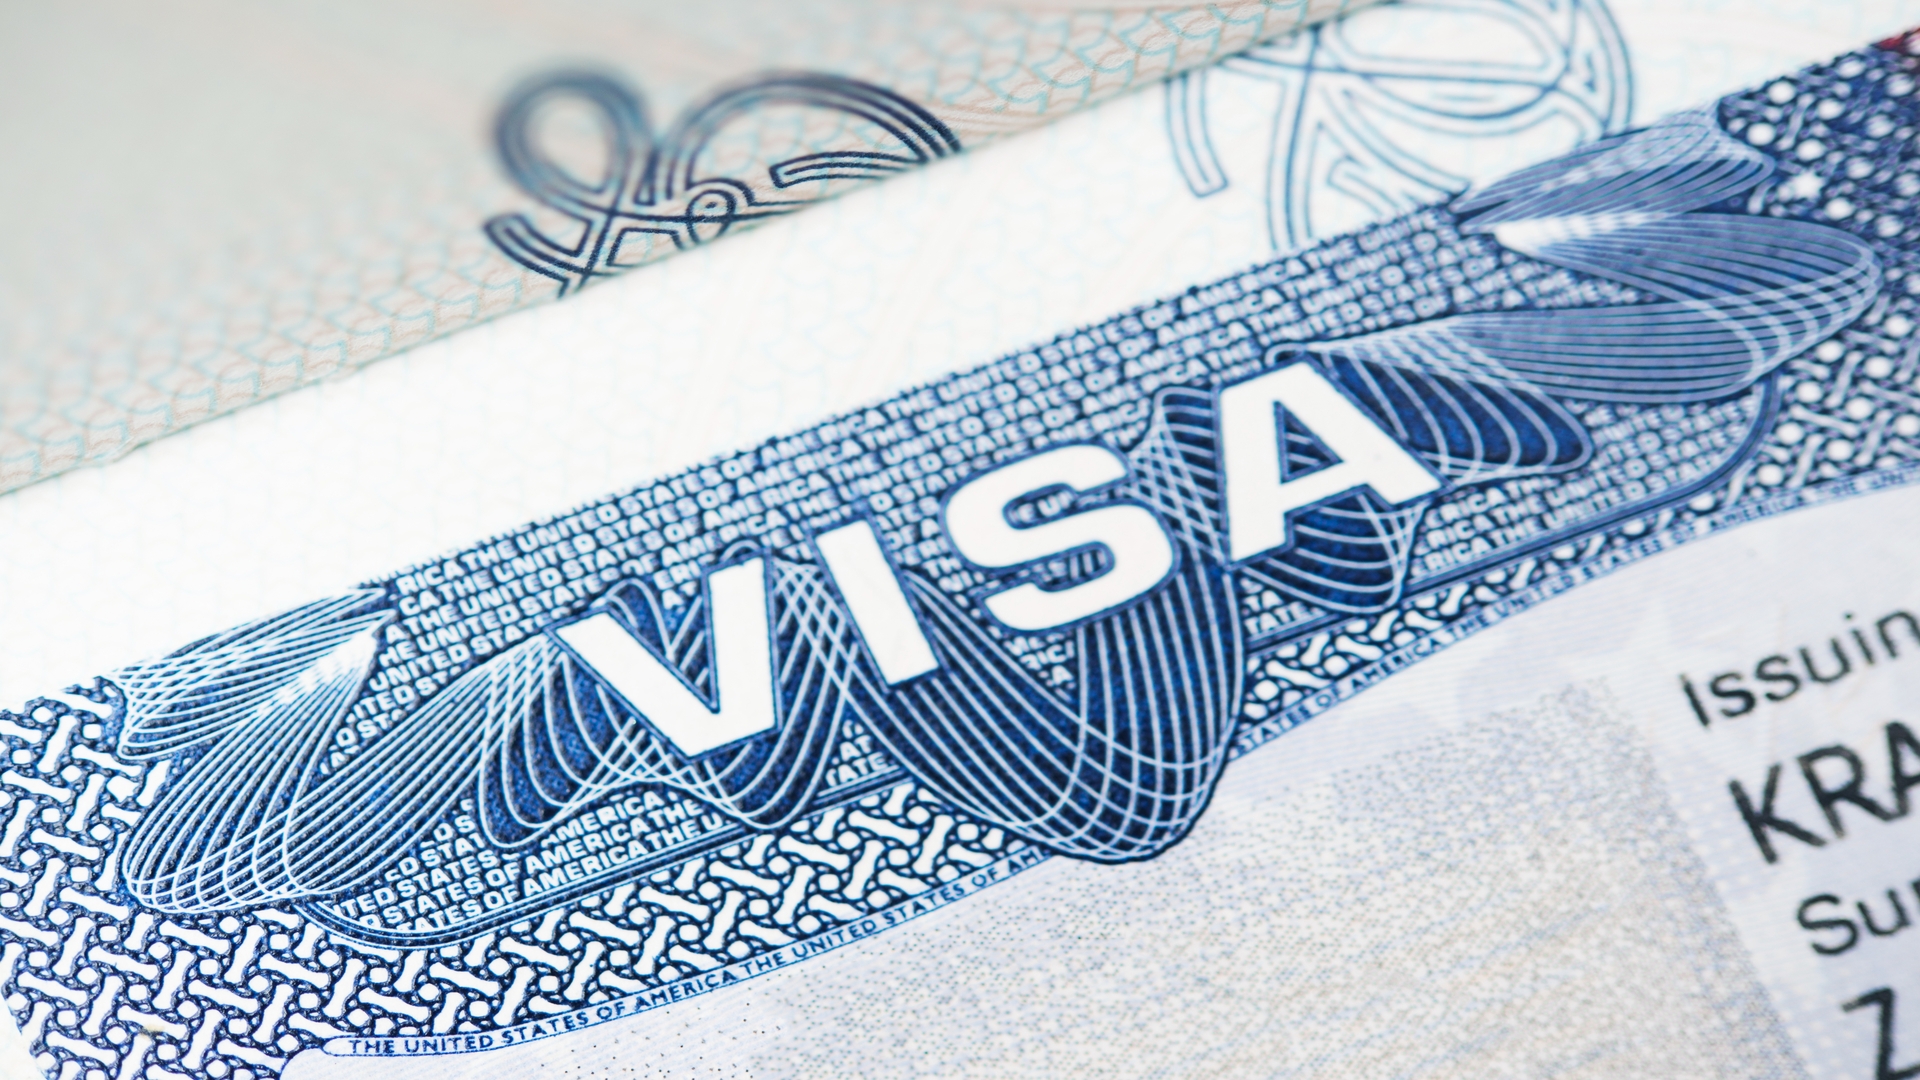 What is o-1 visa | O-1 visa services in Bay Area, California